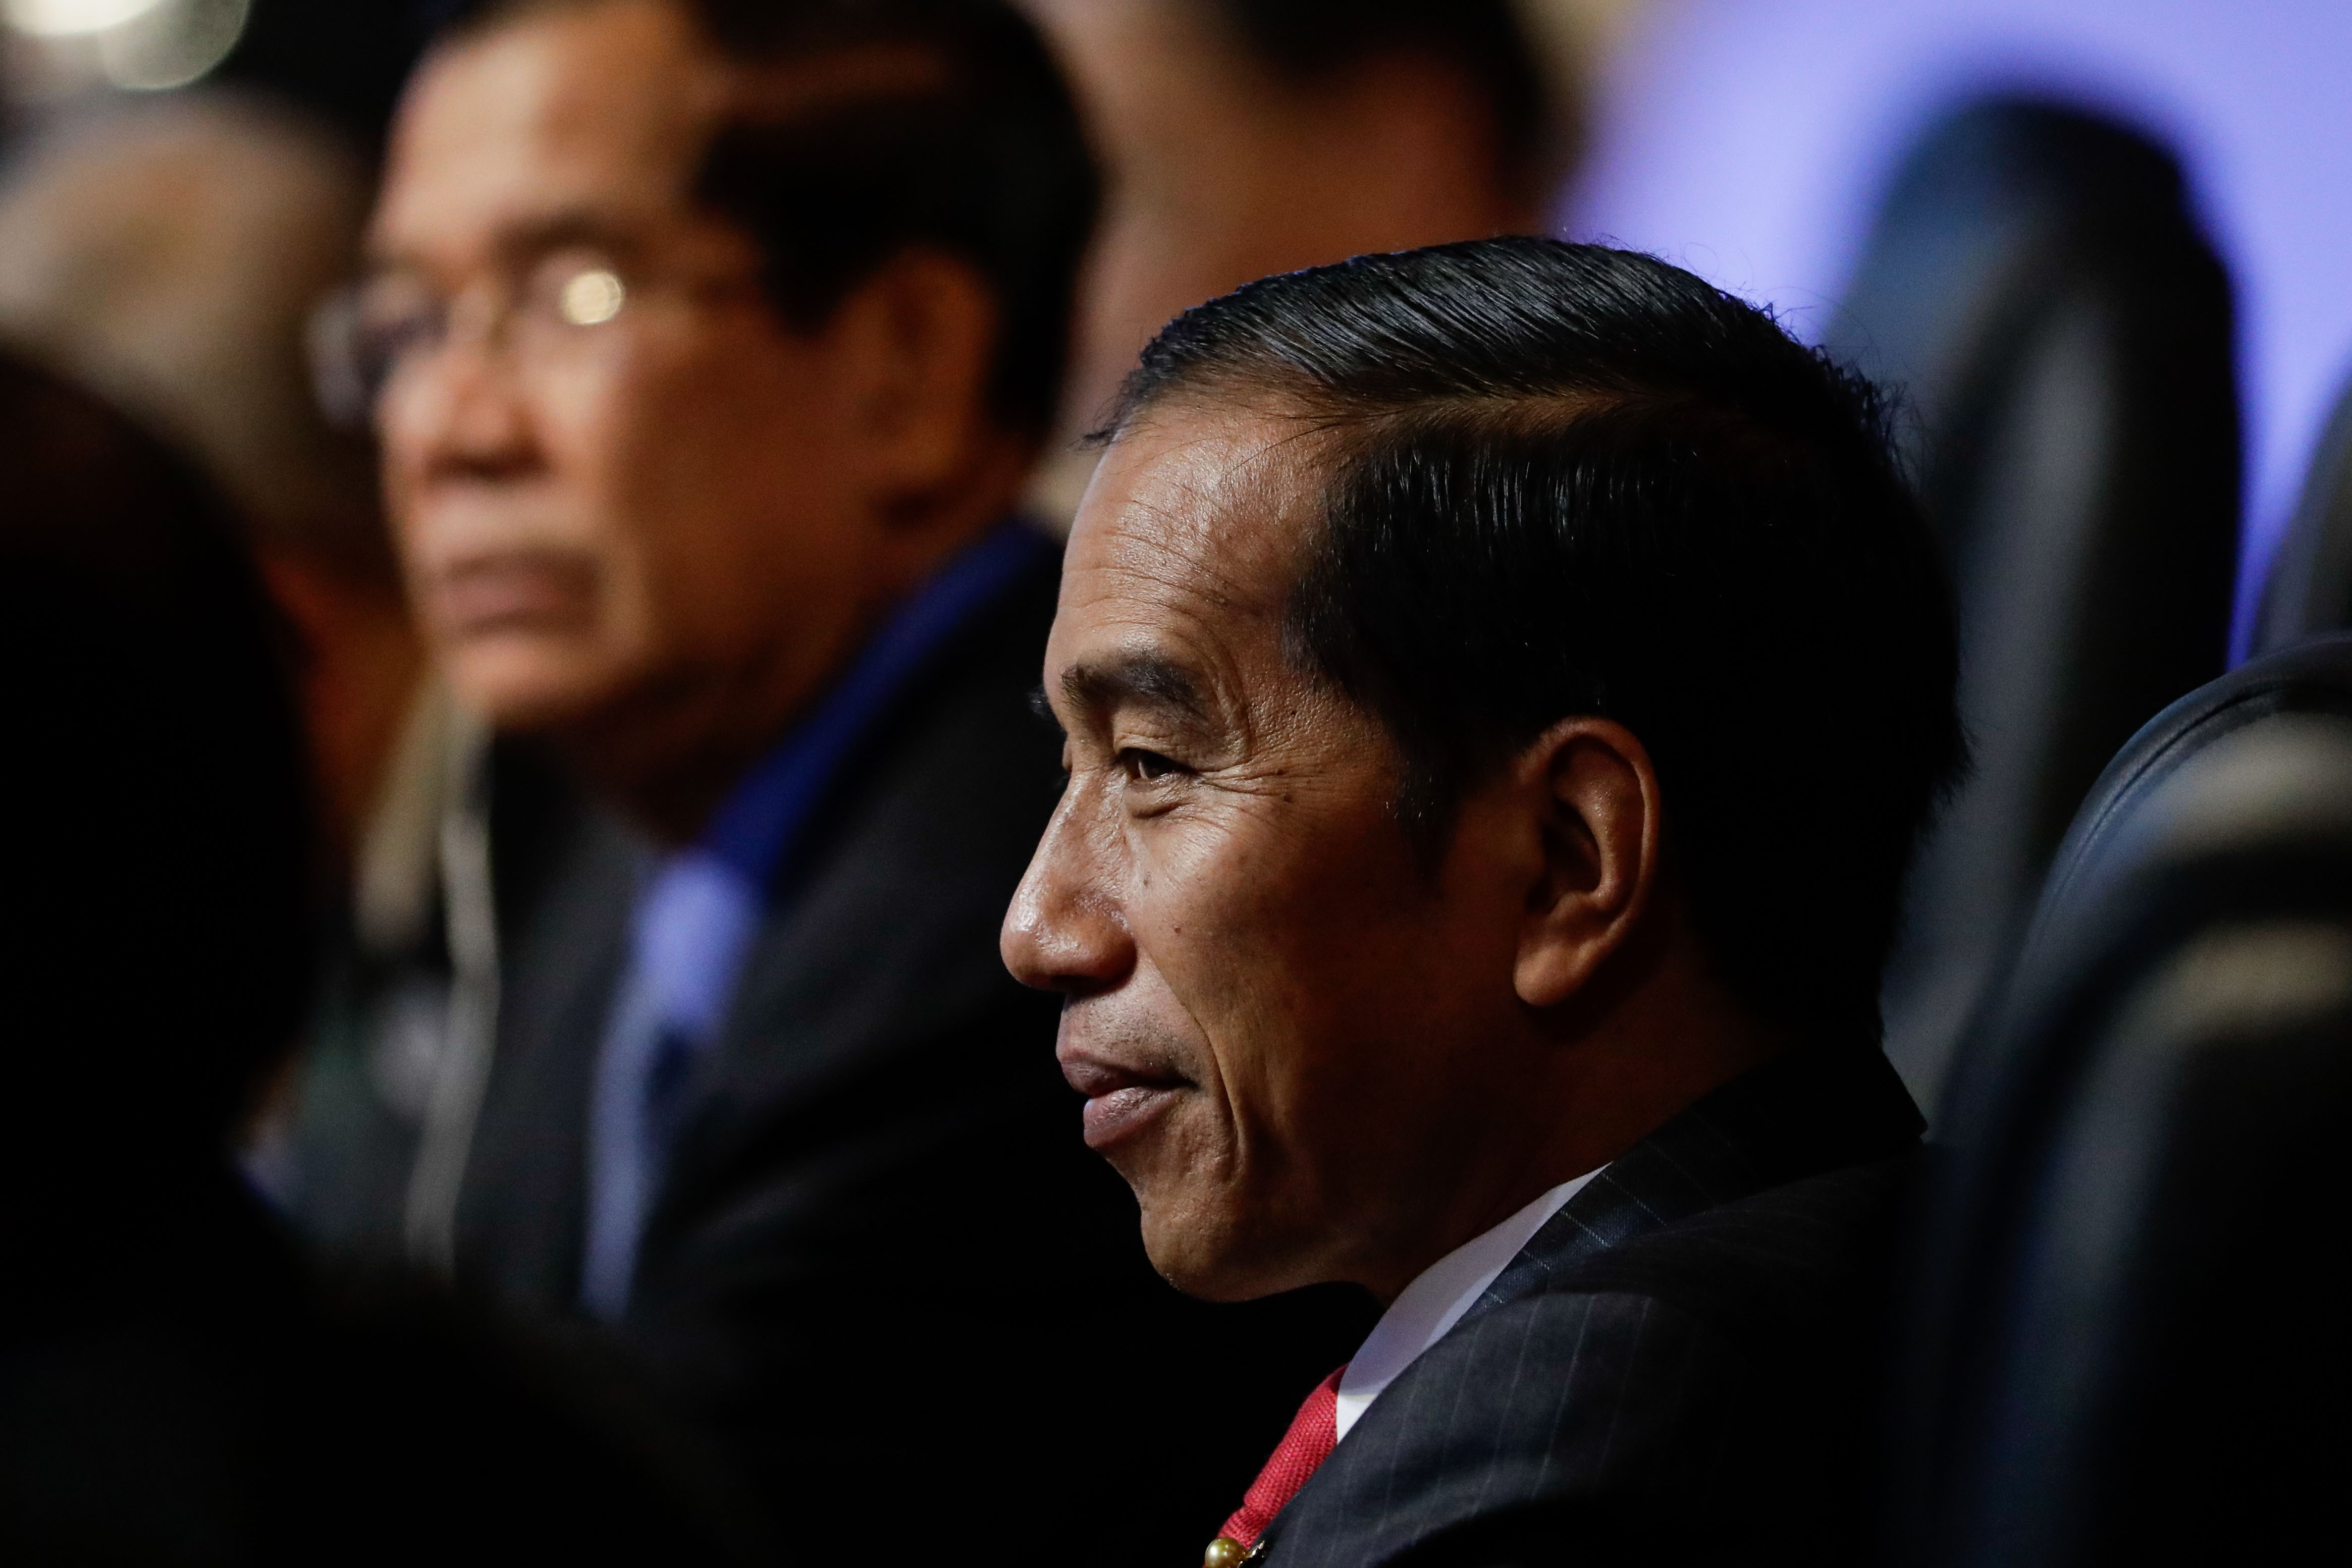 Jokowi defends infrastructure spending as key to national unity